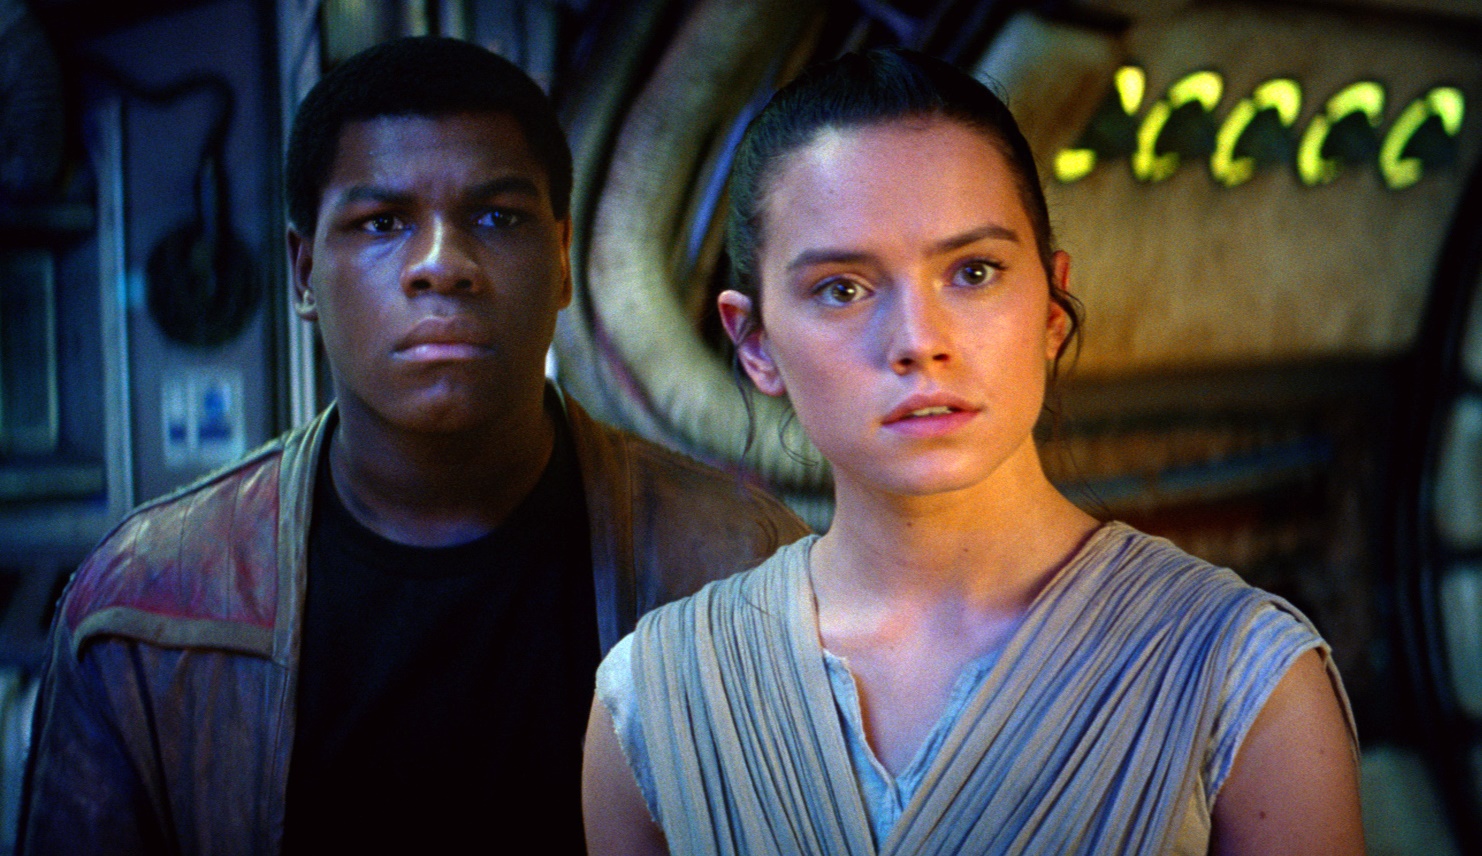 Interracial Relationships in ‘Star Wars: The Force Awakens’: The Importance of Finn & Rey